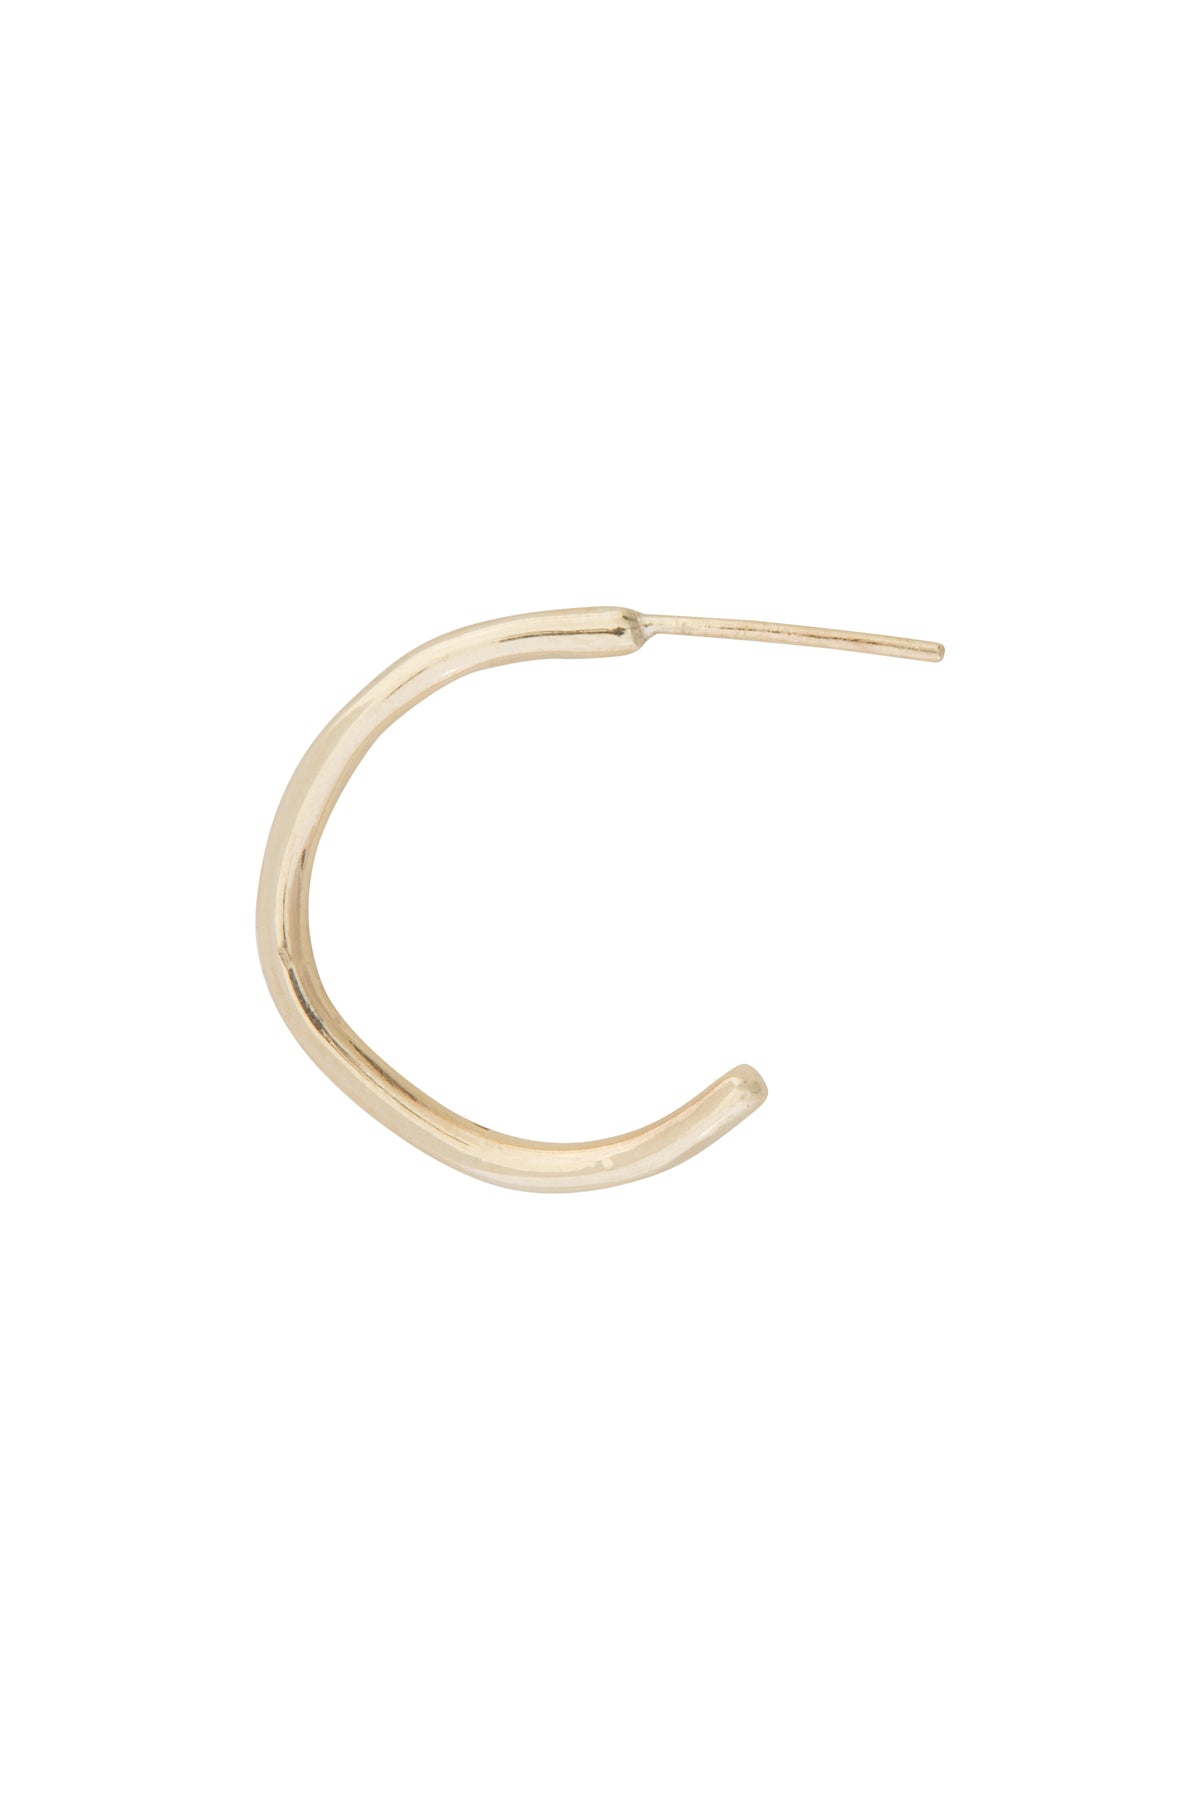 Romantic Hoops Solid Gold